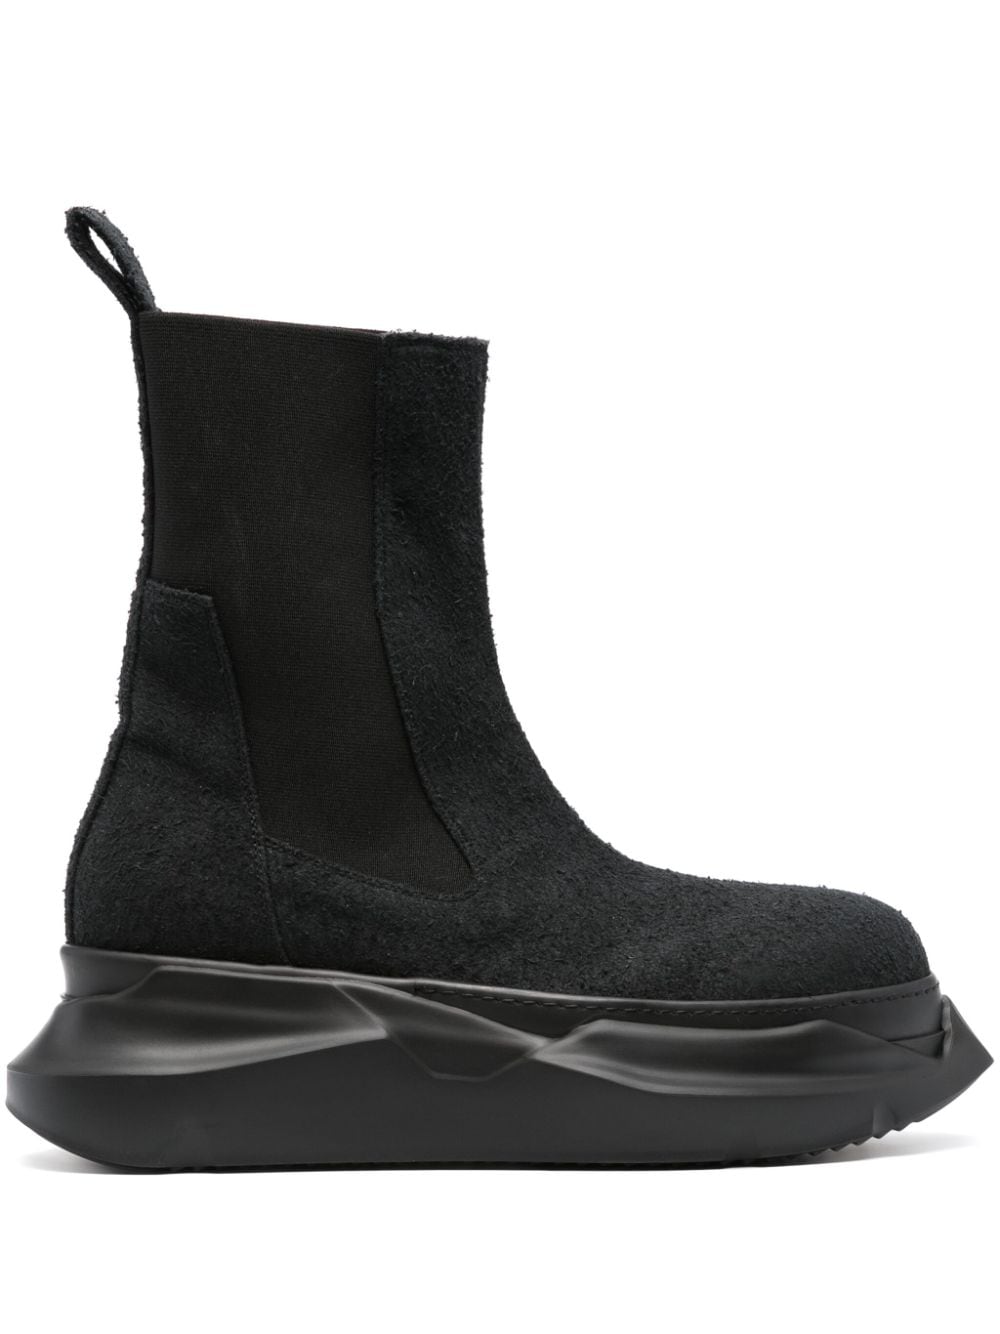 RICK OWENS DRKSHDW BEATLE TURBO CYCLOPS PANELLED BOOTS